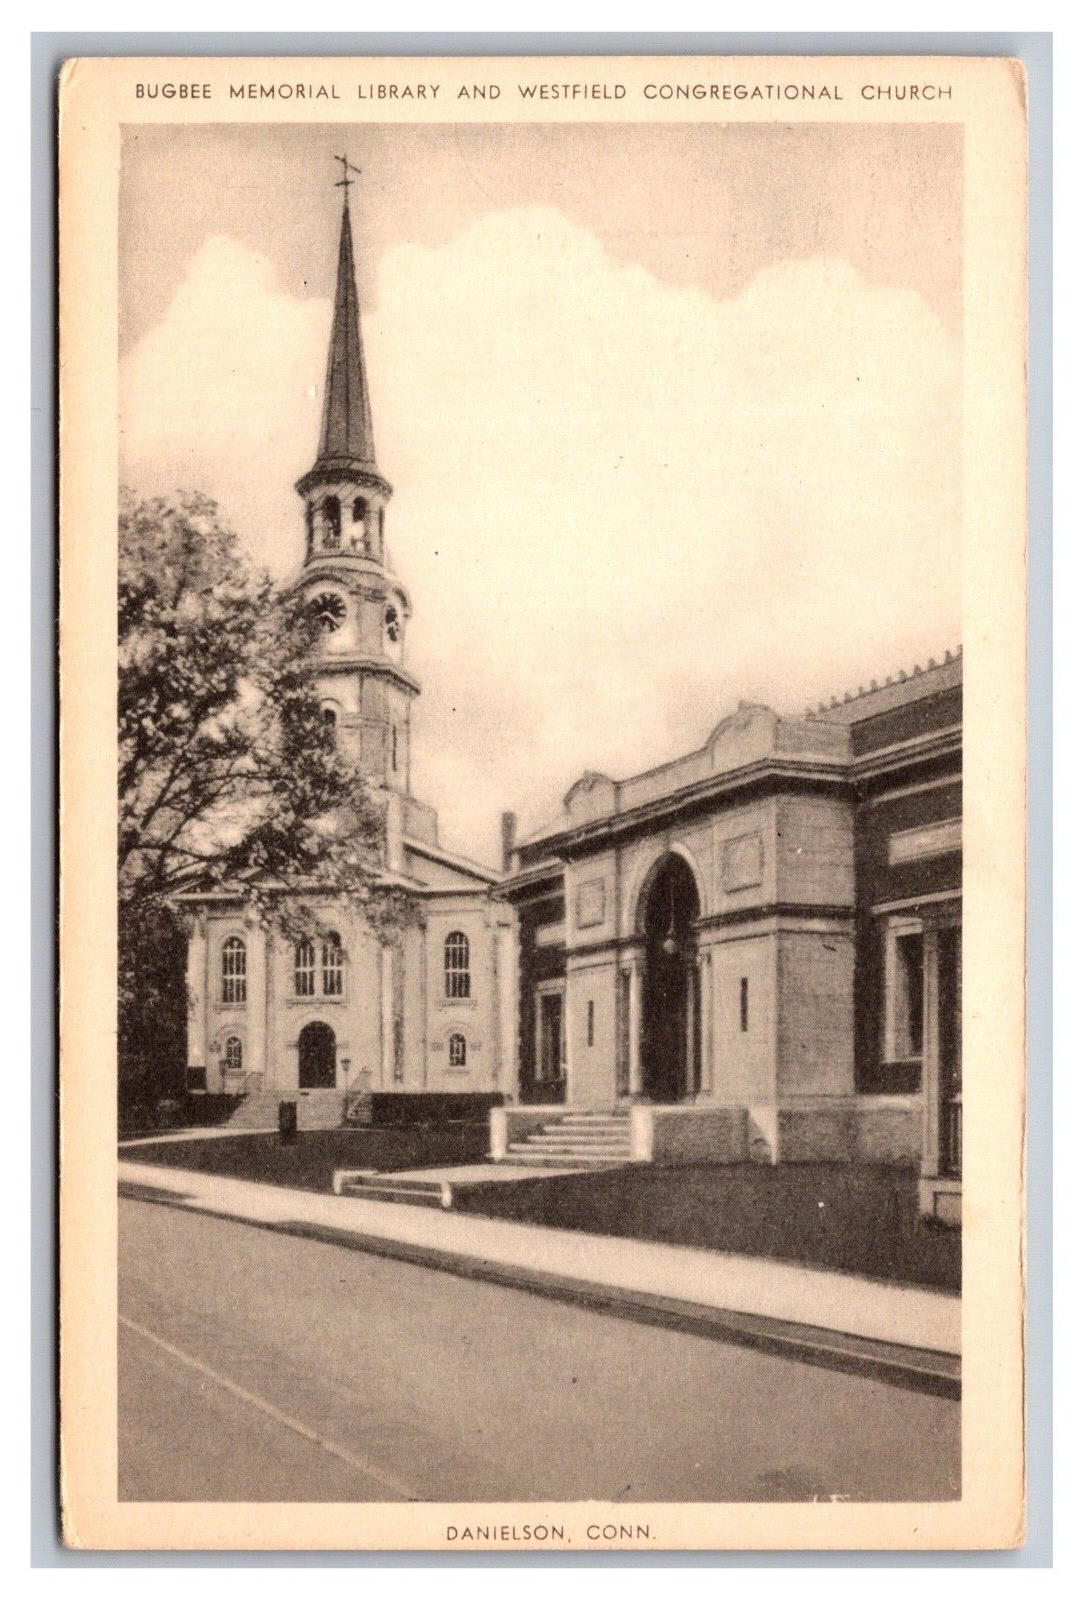 Danielson CT Bugbee Memorial Library & Westfield Congregational Church Postcard